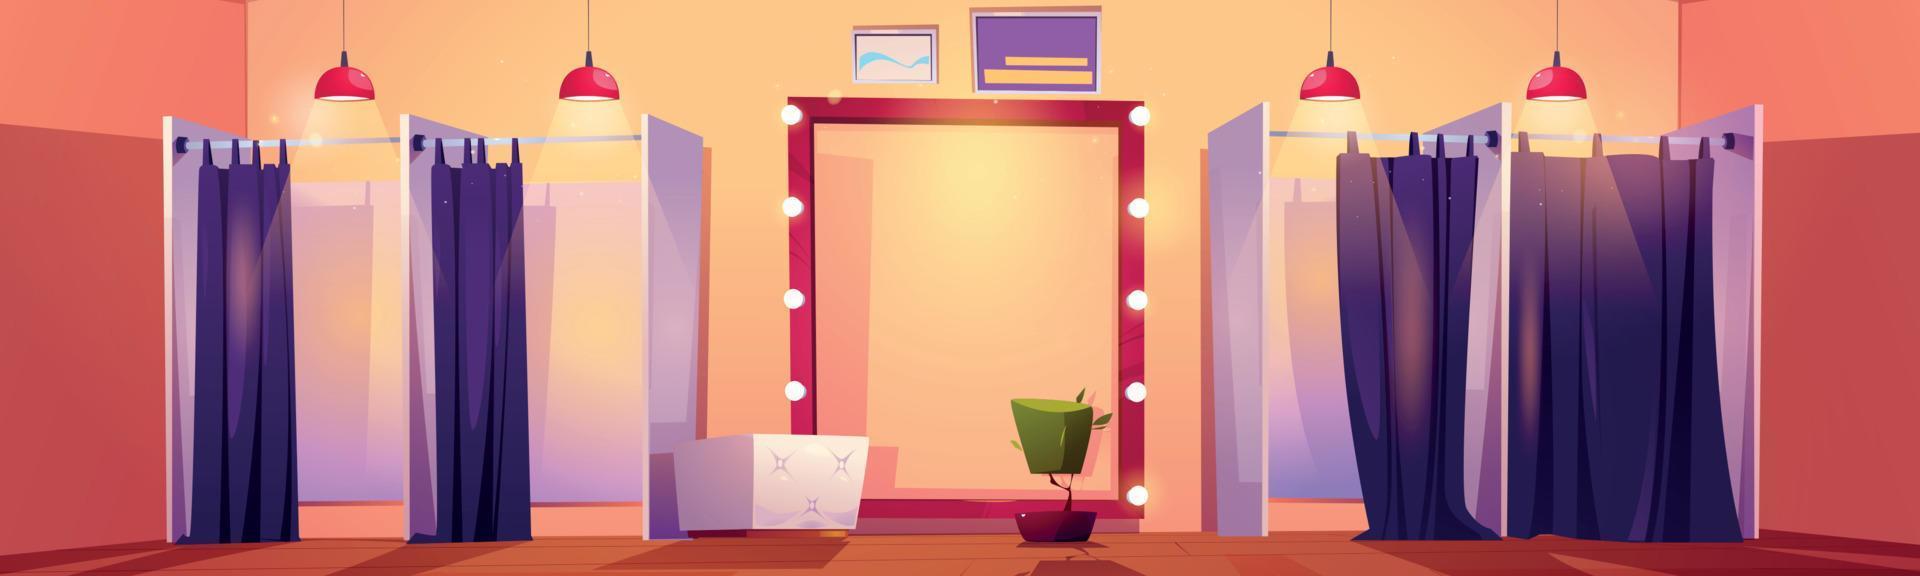 Fitting room interior in fashion store vector